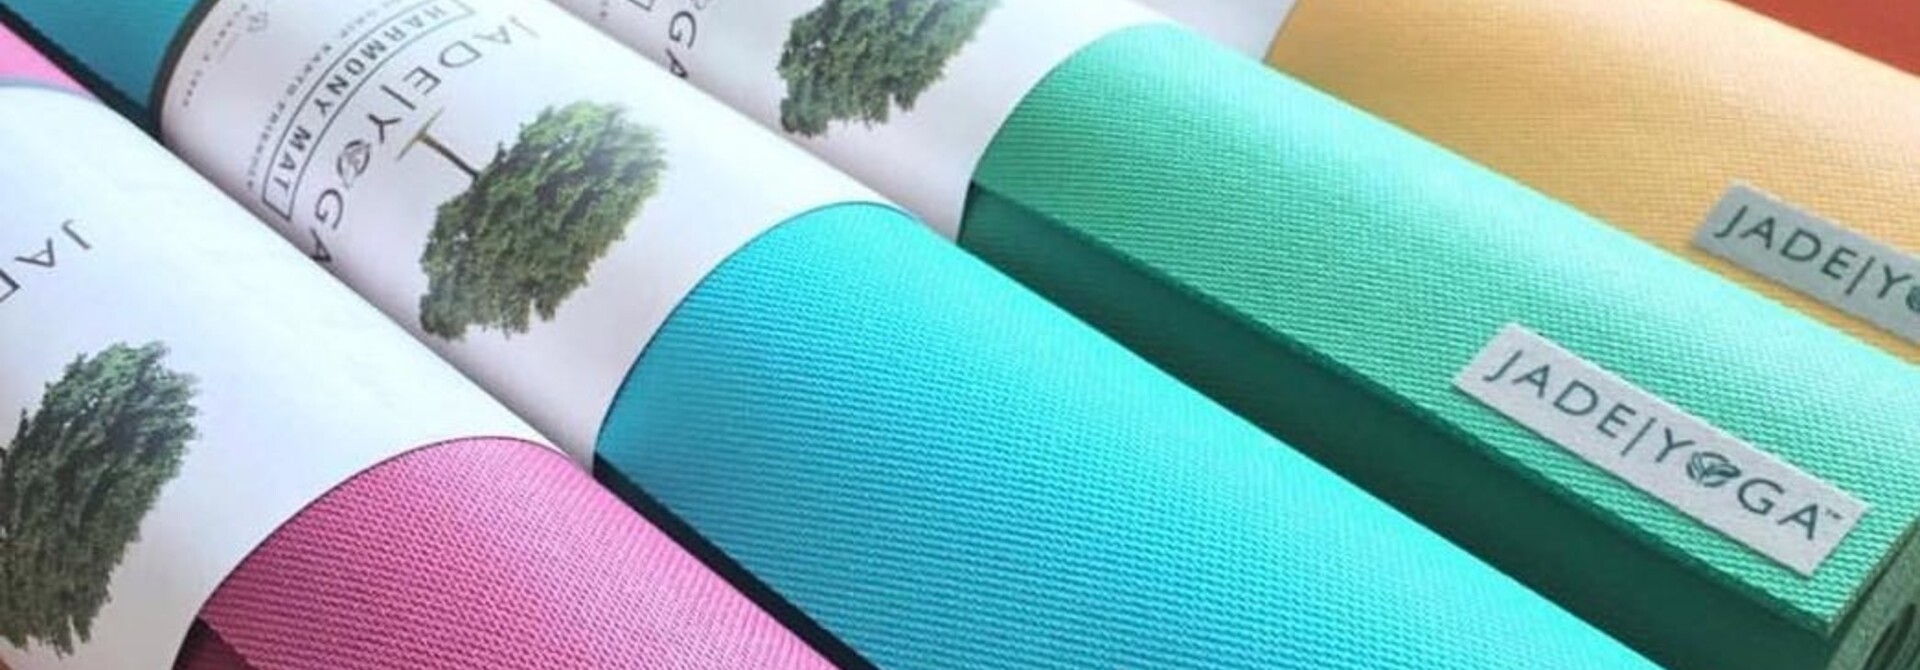 Yoga mats: How to choose one, what material is best and what suits